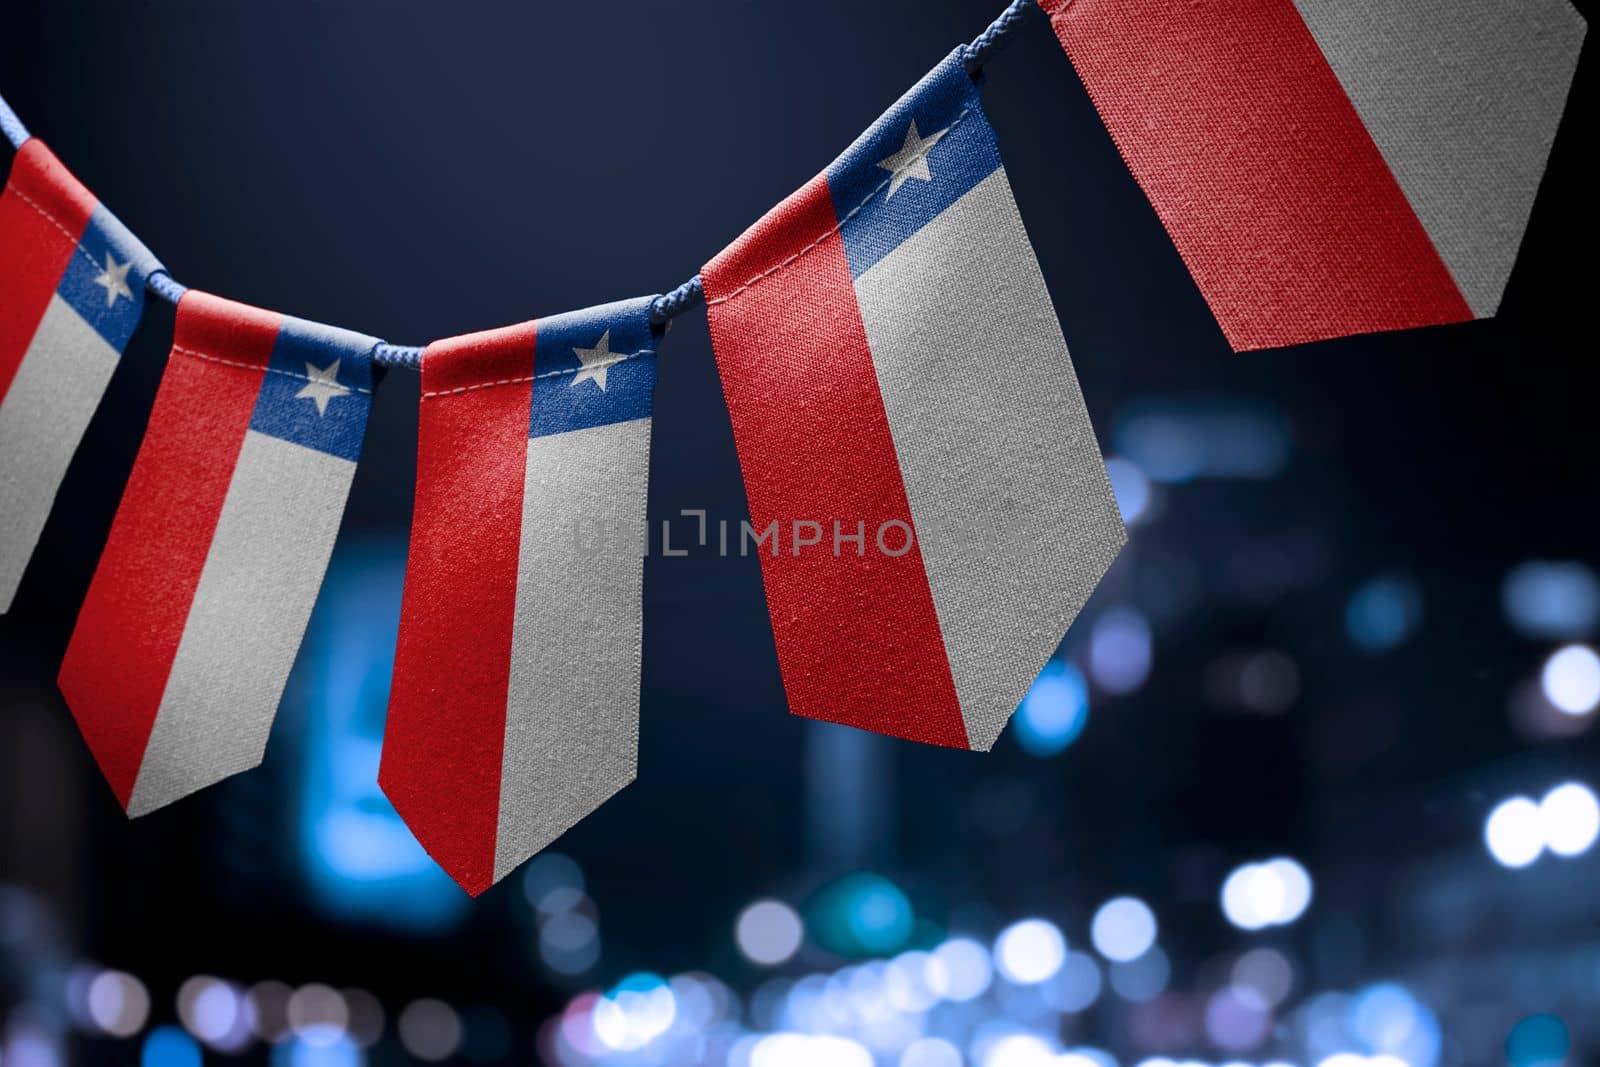 A garland of Chile national flags on an abstract blurred background.